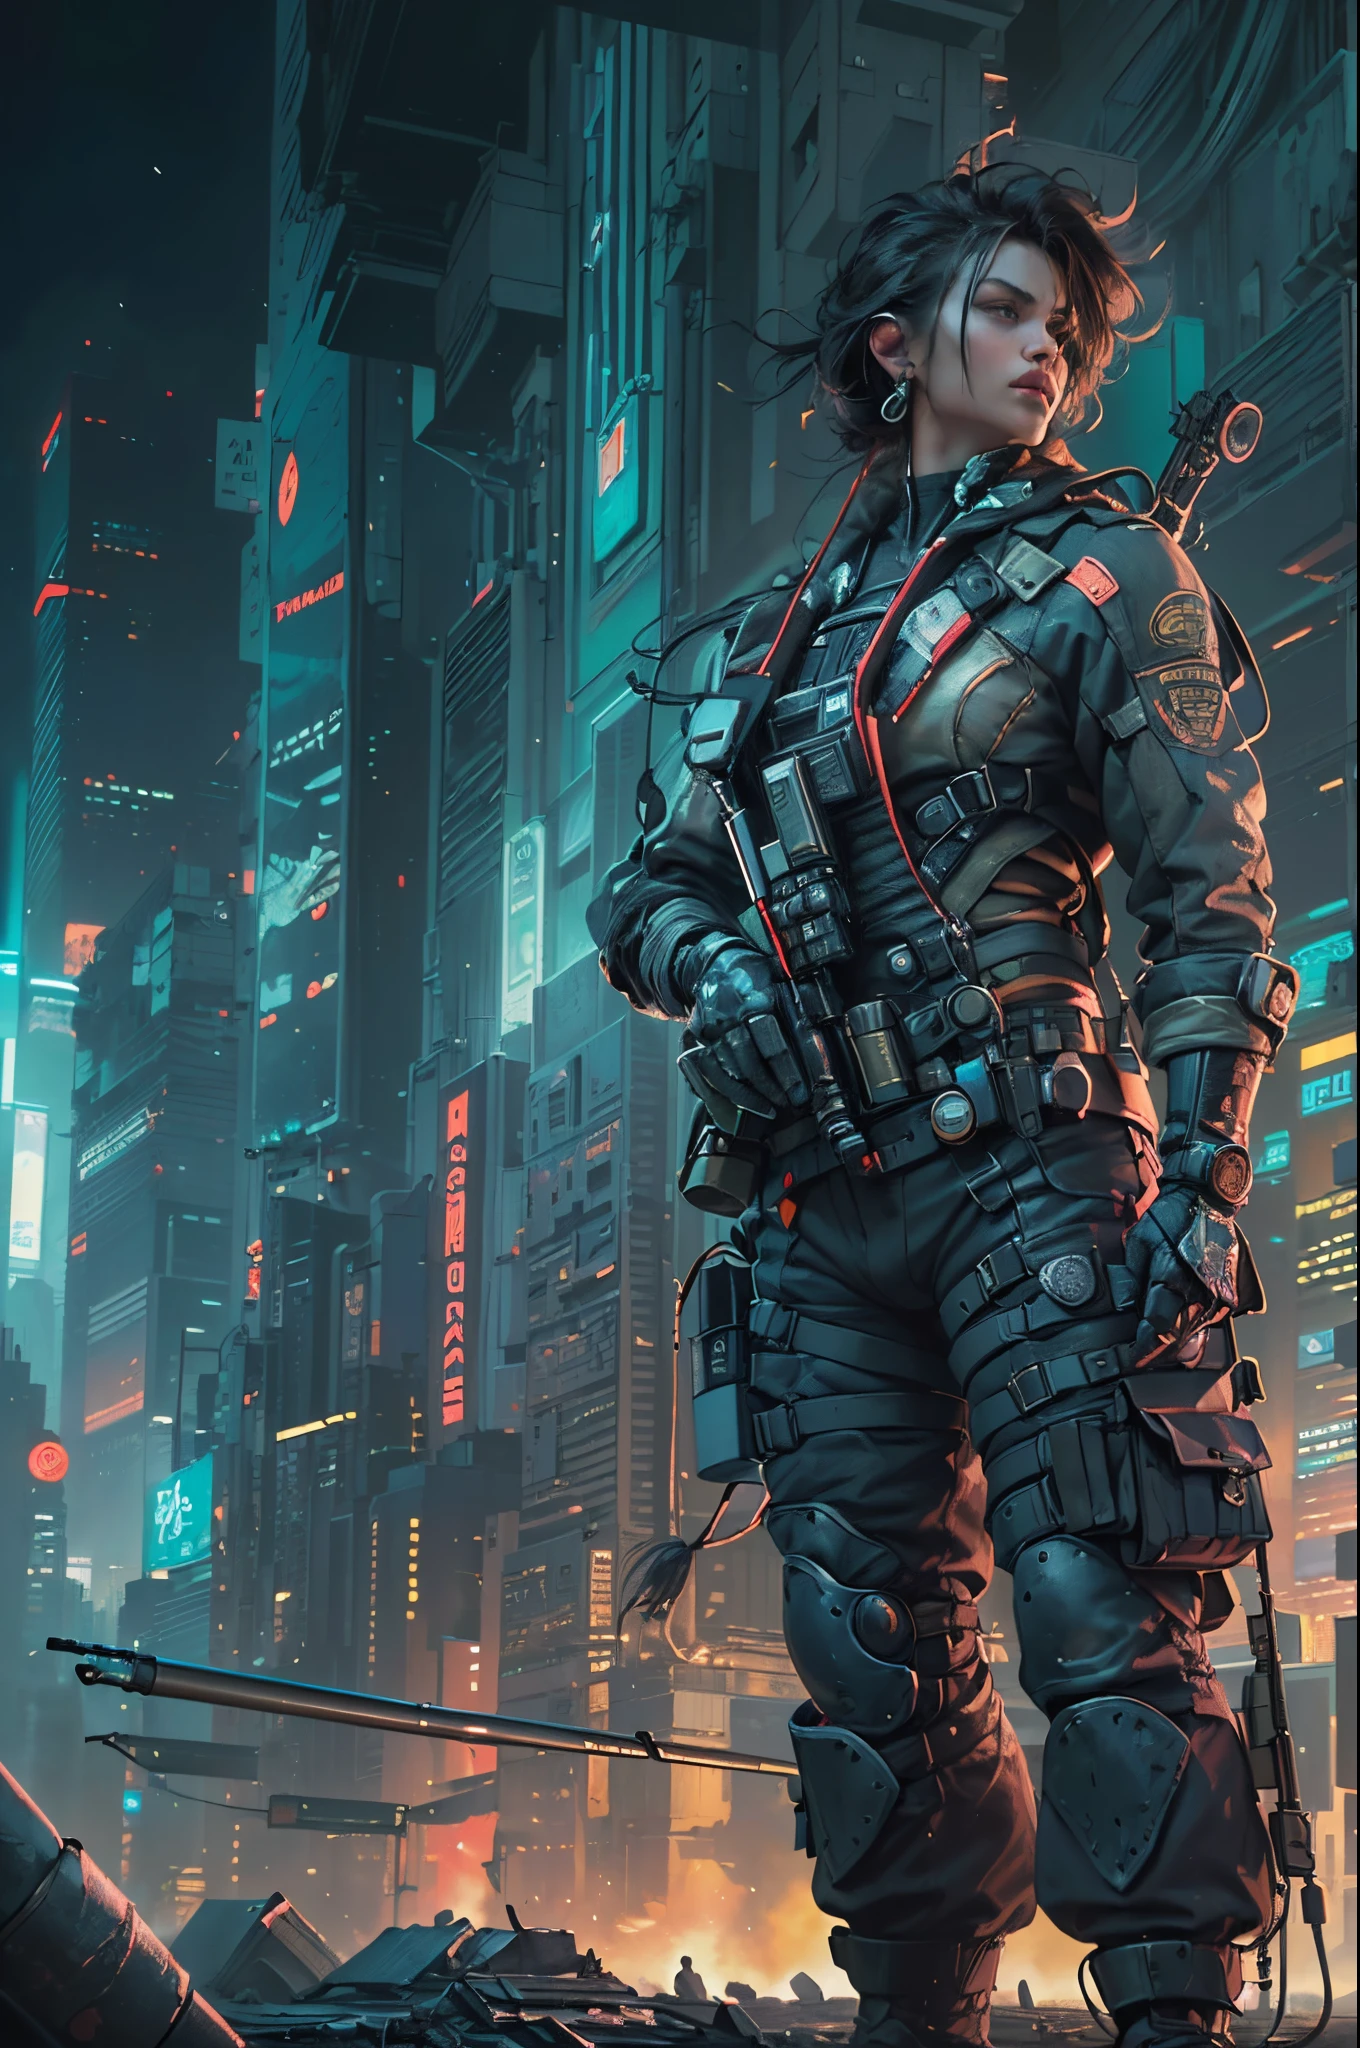 （(Multiple award-winning works, With incredible details, textures and maximum detail，(フォトリアリスティック))），(((Use cyberpunk style to depict a future war，Humanity&#39;s Holy War，)))，early evening，The setting sun slopes to the west，Lazy muscular heavy soldier yawning while standing next to LunarPunkAI sports car，in the shadows beside him，Hidden a reelmech girl，She is preparing to sneak attack the heavily armored soldiers。（(Handsome young boy，))，((Tall, well-proportioned middle-aged man))，heavy look， (Anatomically correct limbs and physique:1.5), (Anatomically correct perspective and occlusion：1.5)，(Gender characteristics are very obvious：1.5)，(correct faces), wide angles，(((Correct ratio of people to vehicles：1.6)))，((Add some scenes：trench，Arsenal，lots of gunoon Night，Huge full moon，bedazzled，cyberpunk city landscape, skyscrapper, ))， (Complicated details:1.1), the complex background))， ((Bright and vivid color scheme：1.7))，((dynamic viewing angle+dynamic combination))，